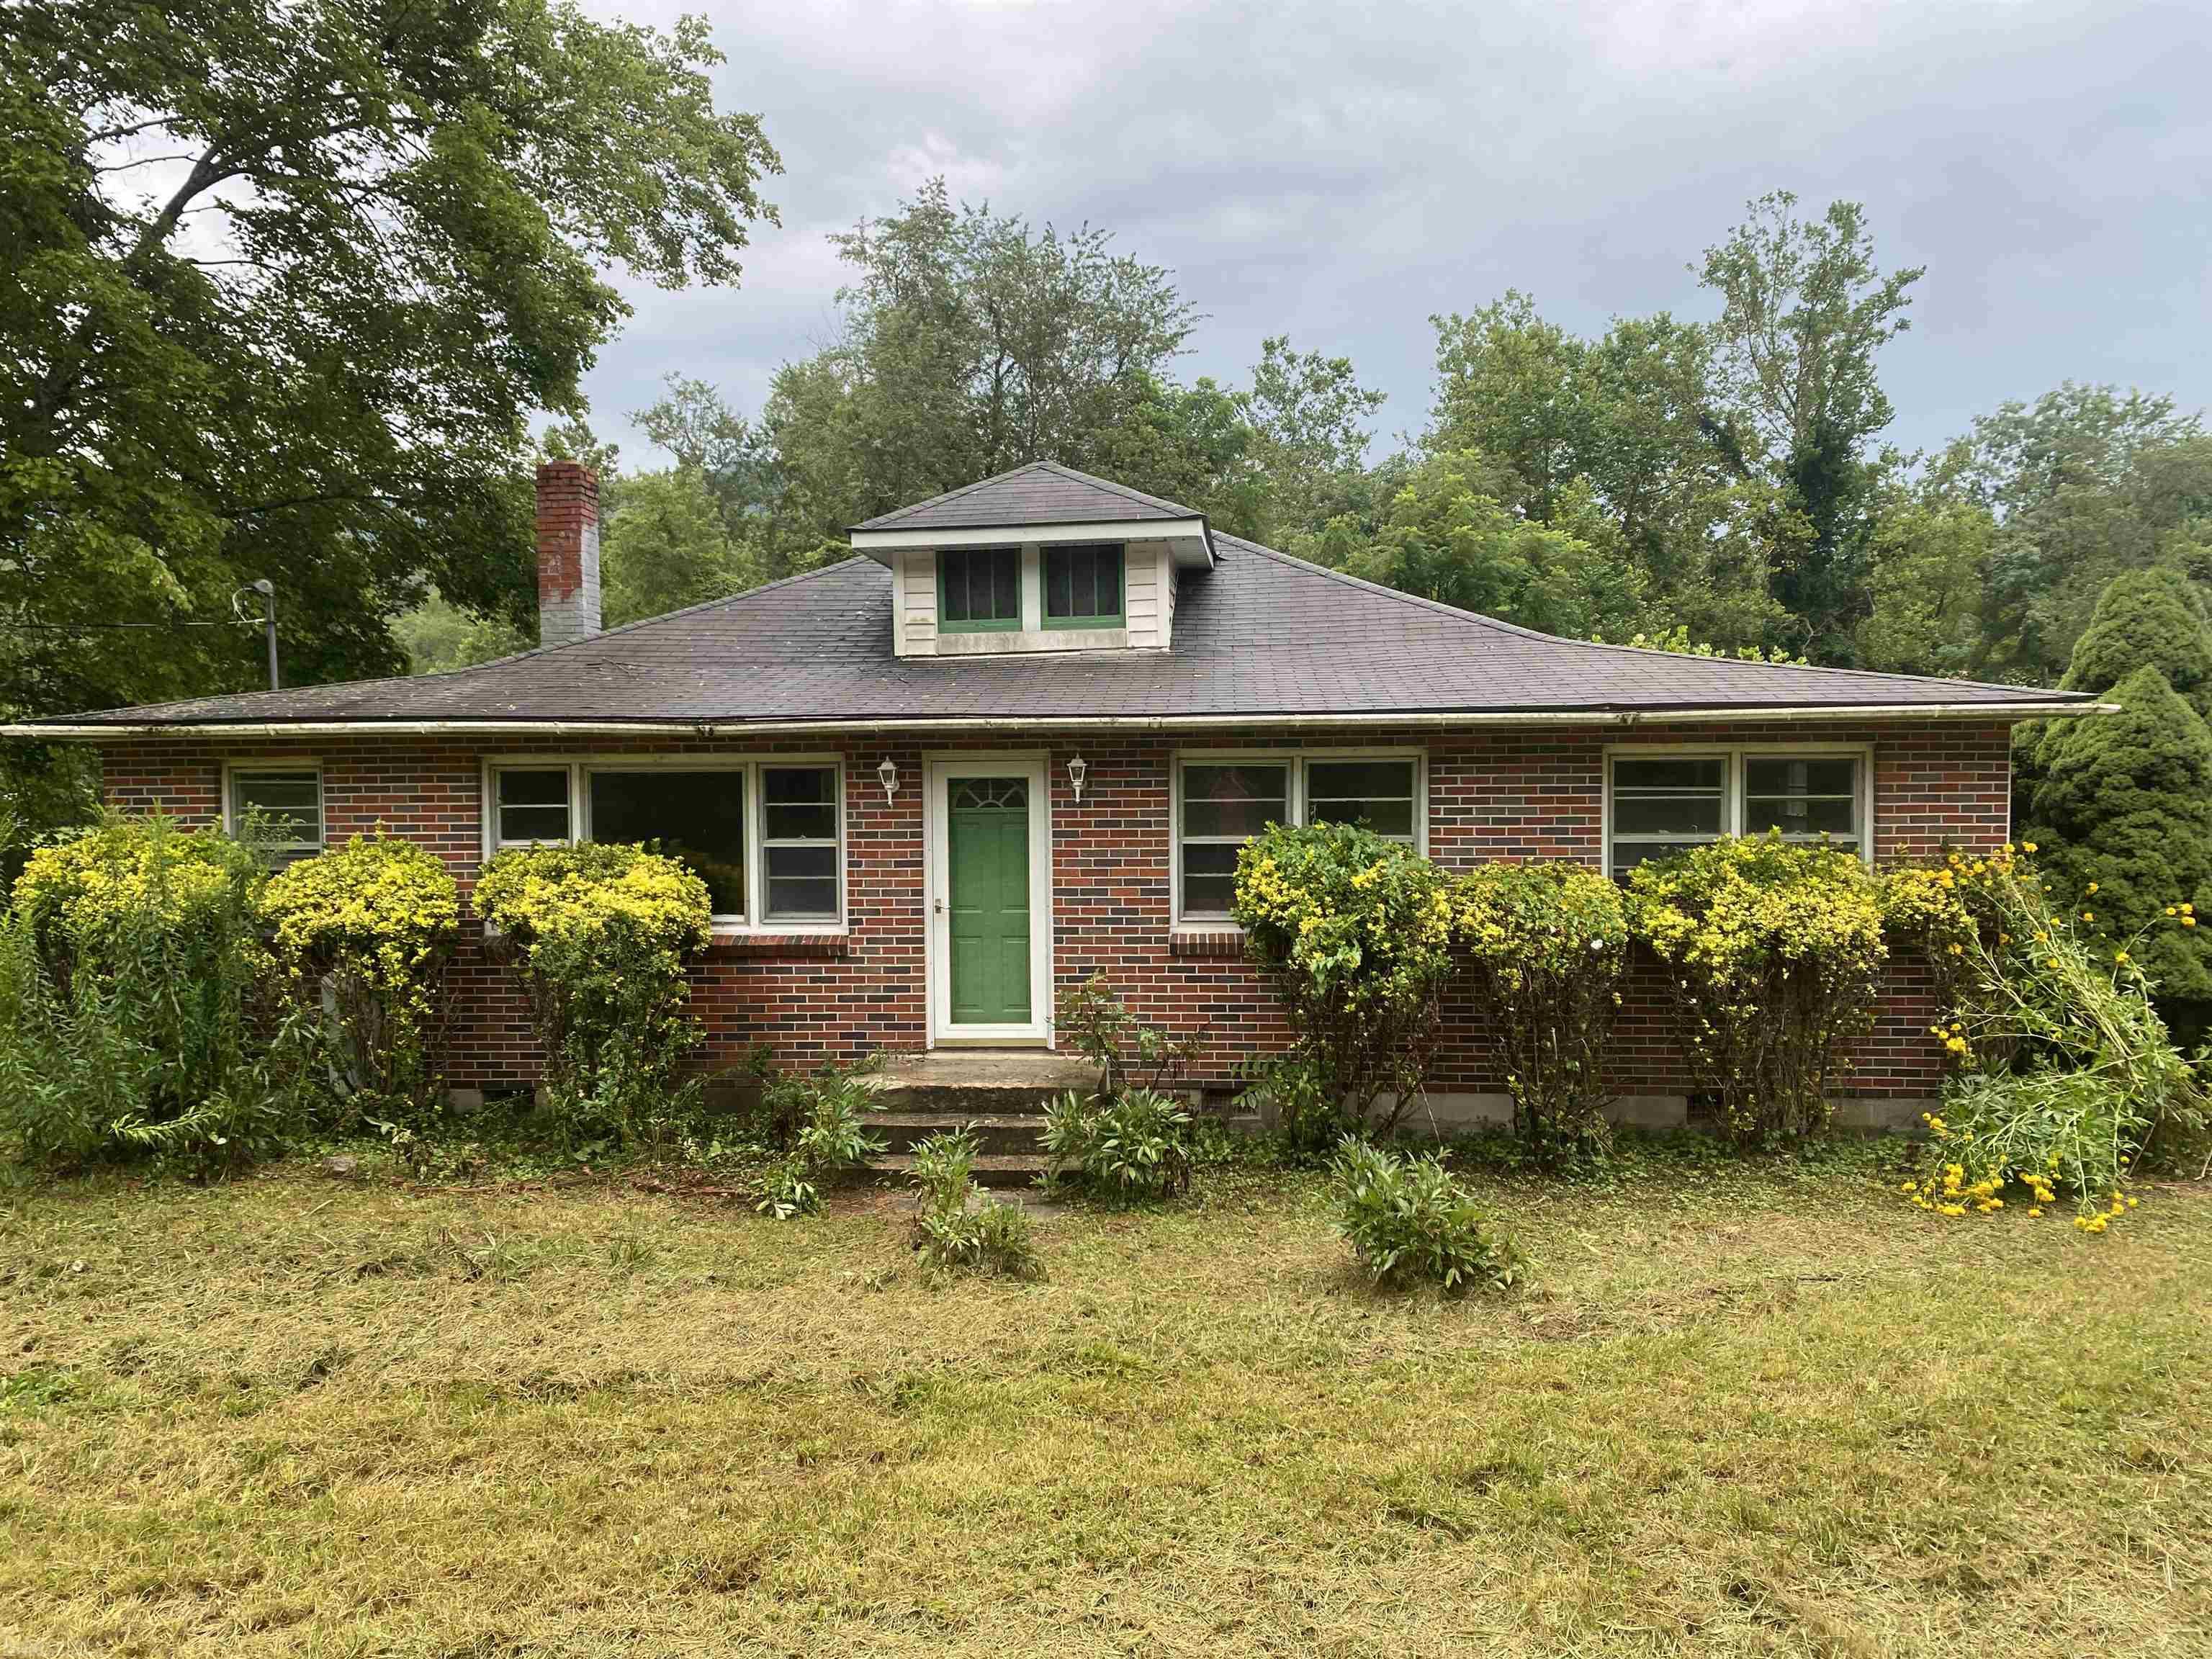 Fixer-upper in Bland County! Bring your creative juices and bring this property back to life. Property features a 3 bed 1 bath home as well as detached building and half acre lot. Located right off of Interstate 77. Out-of-market agents to book appts M-F 9am-4pm (excluding holidays)